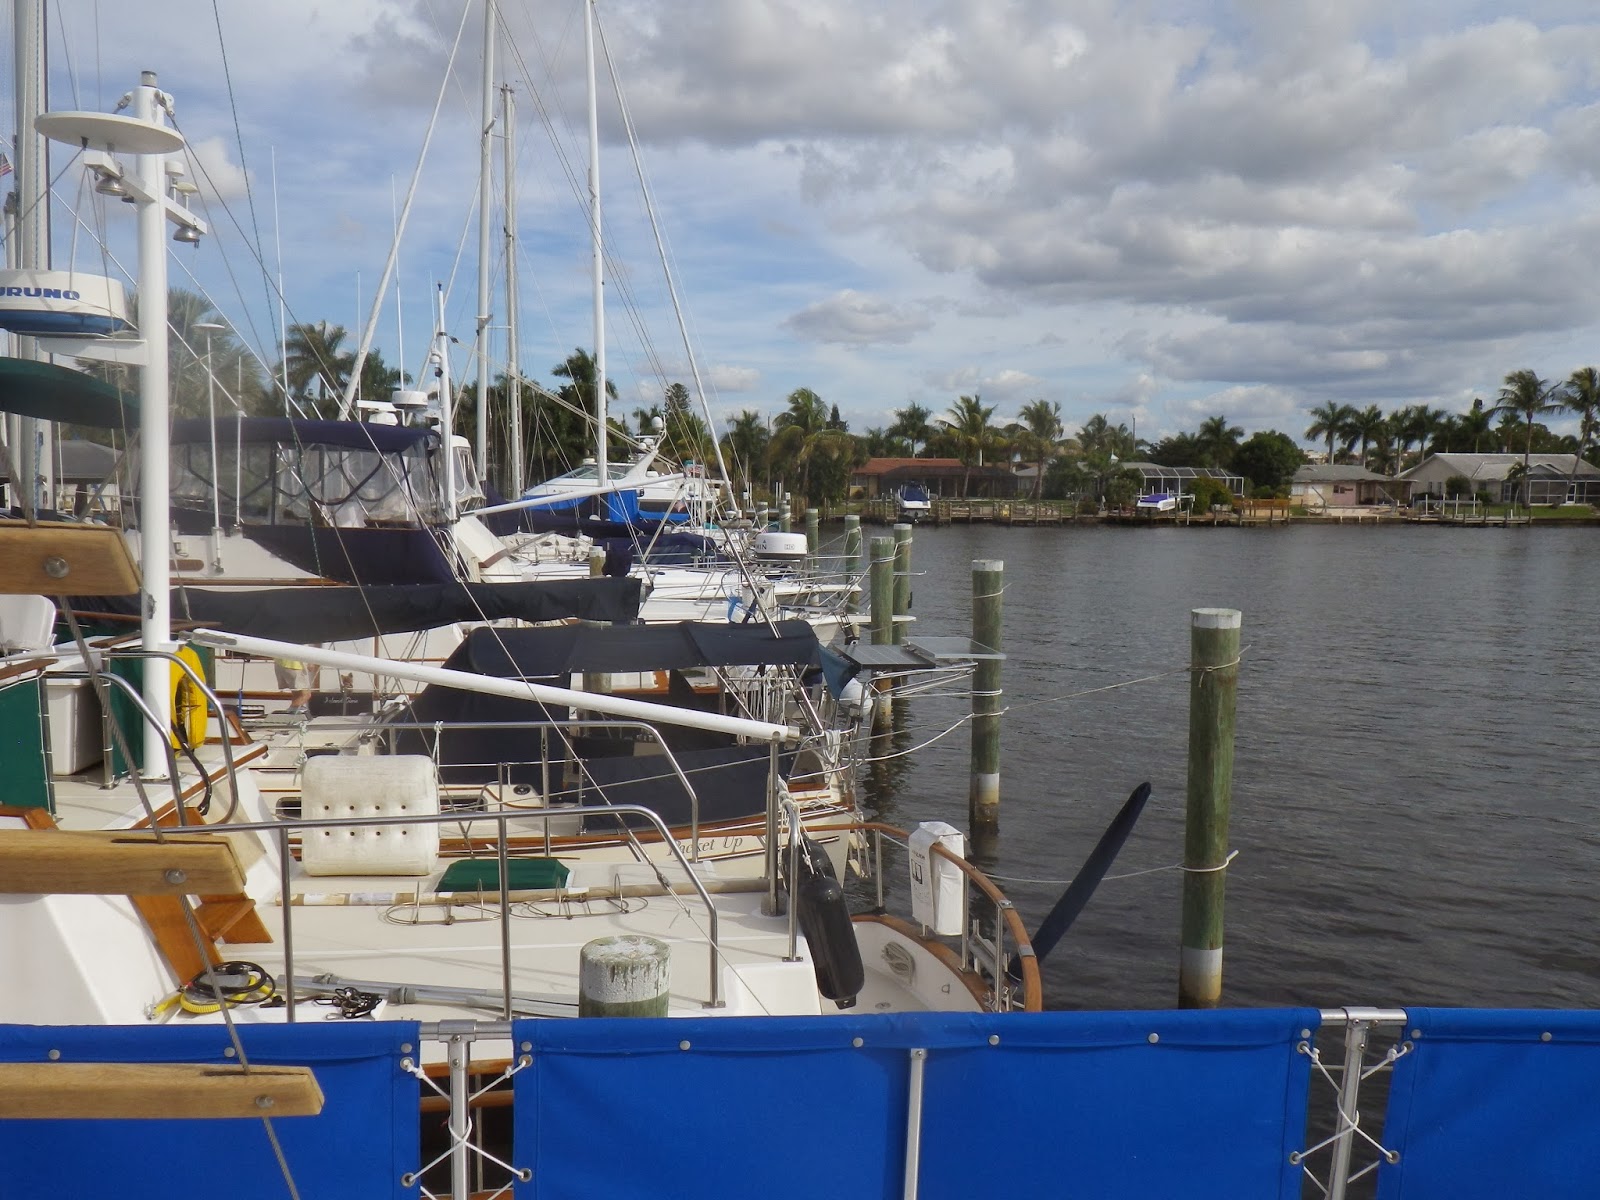 Southern Belle: Cape Coral Yacht Club - Our new home for a little while